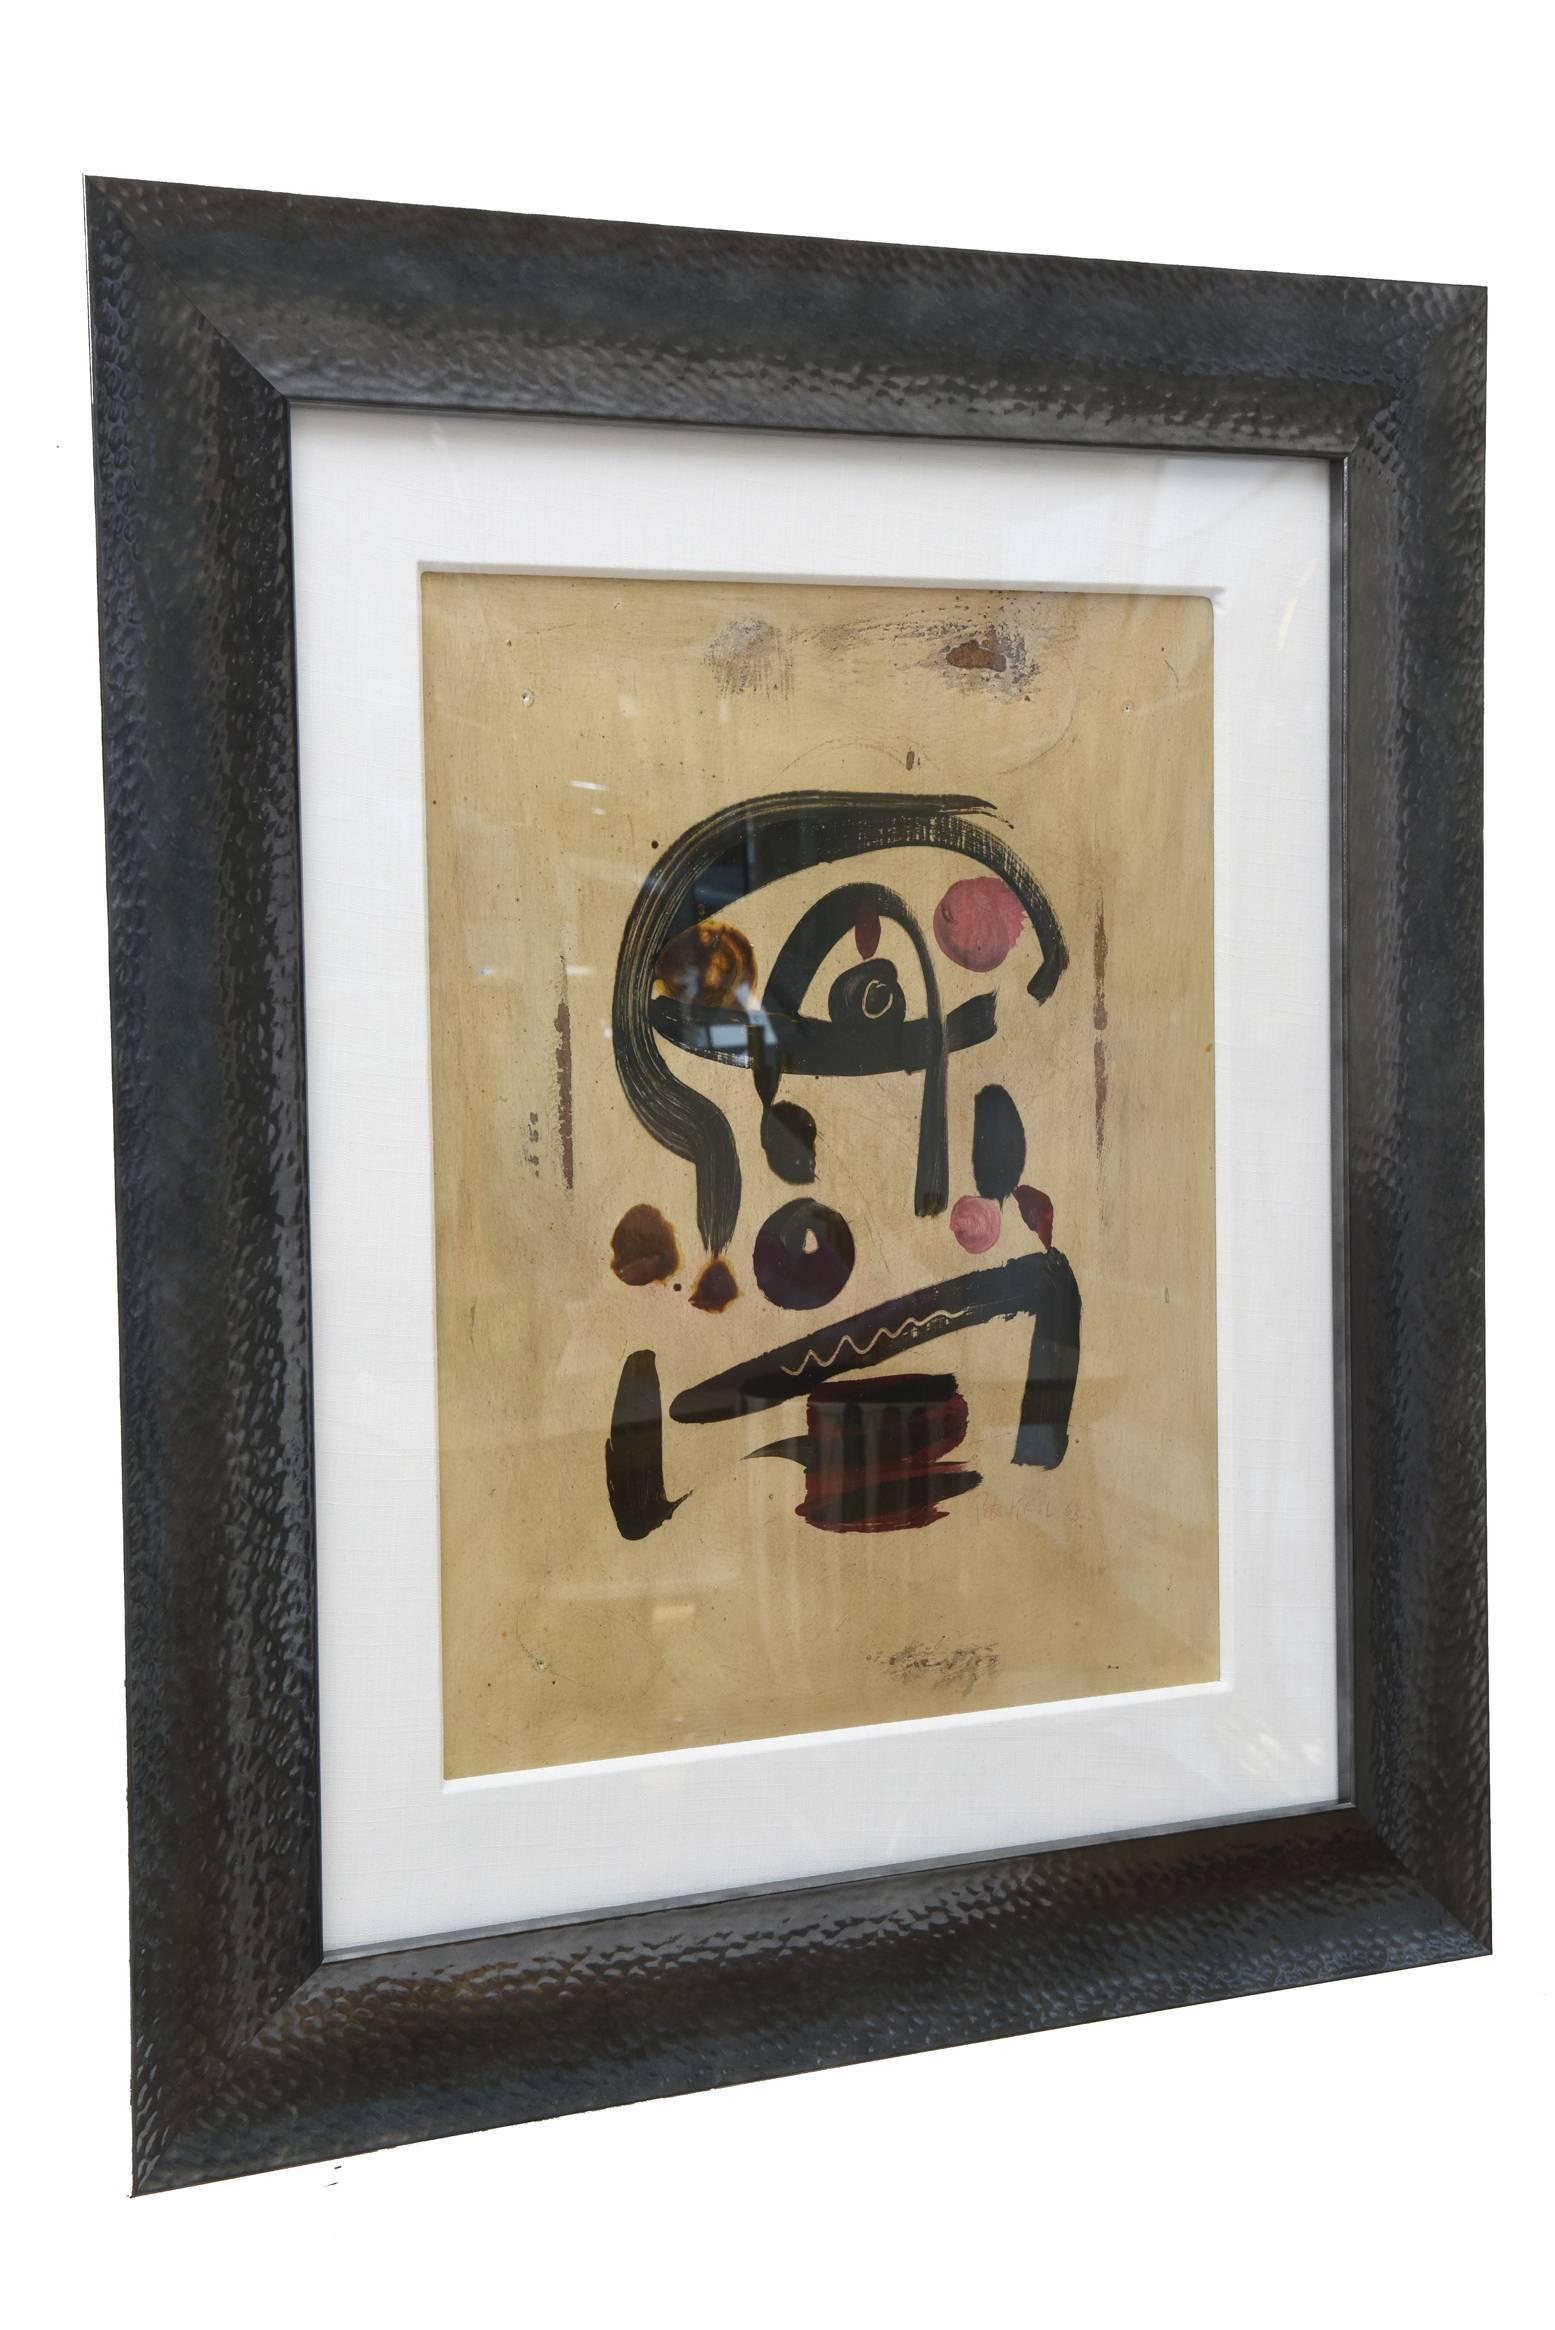 This wonderful abstract vintage painting has influences of Miro and his painterly strokes and gestures of paint in abstract form. The background is tan with stokes of black dark gray and elements of subdued red. It also has influences to the Art